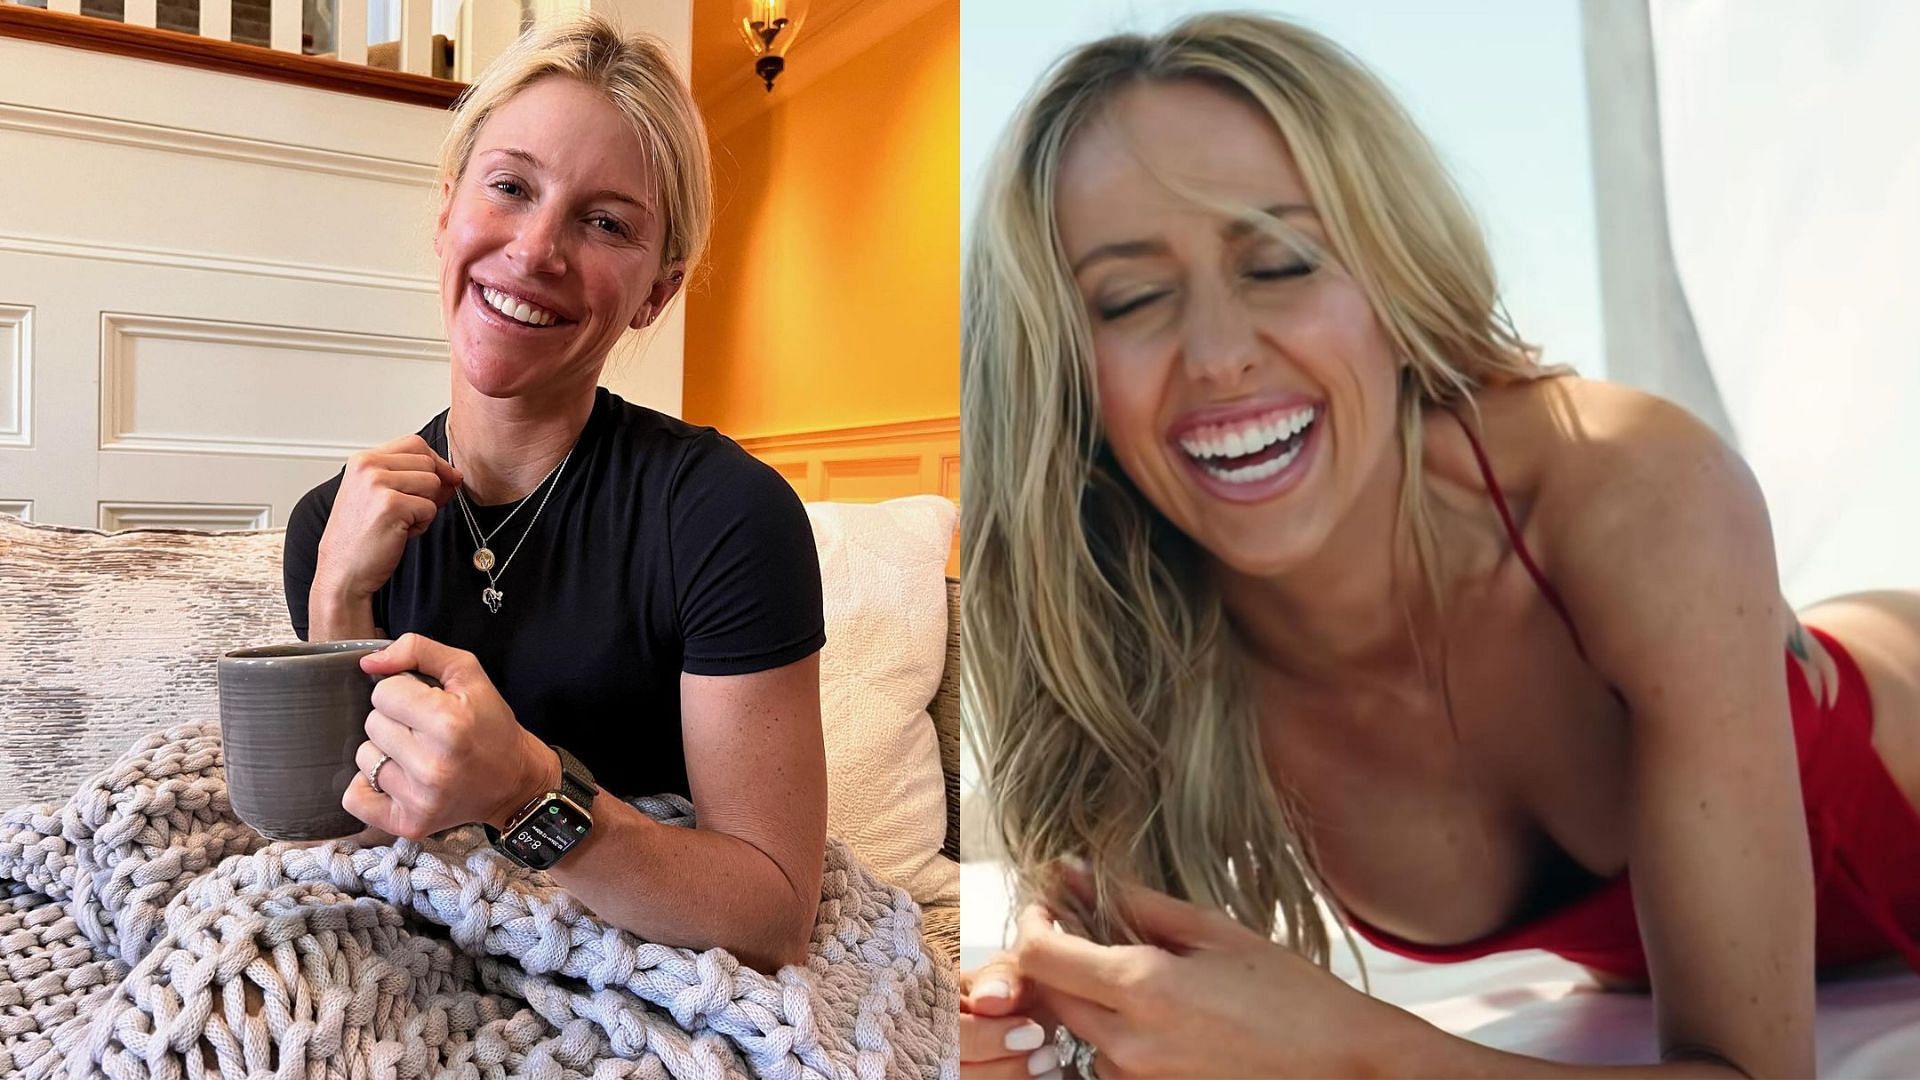 Kelly Stafford reacts to Brittany Mahomes